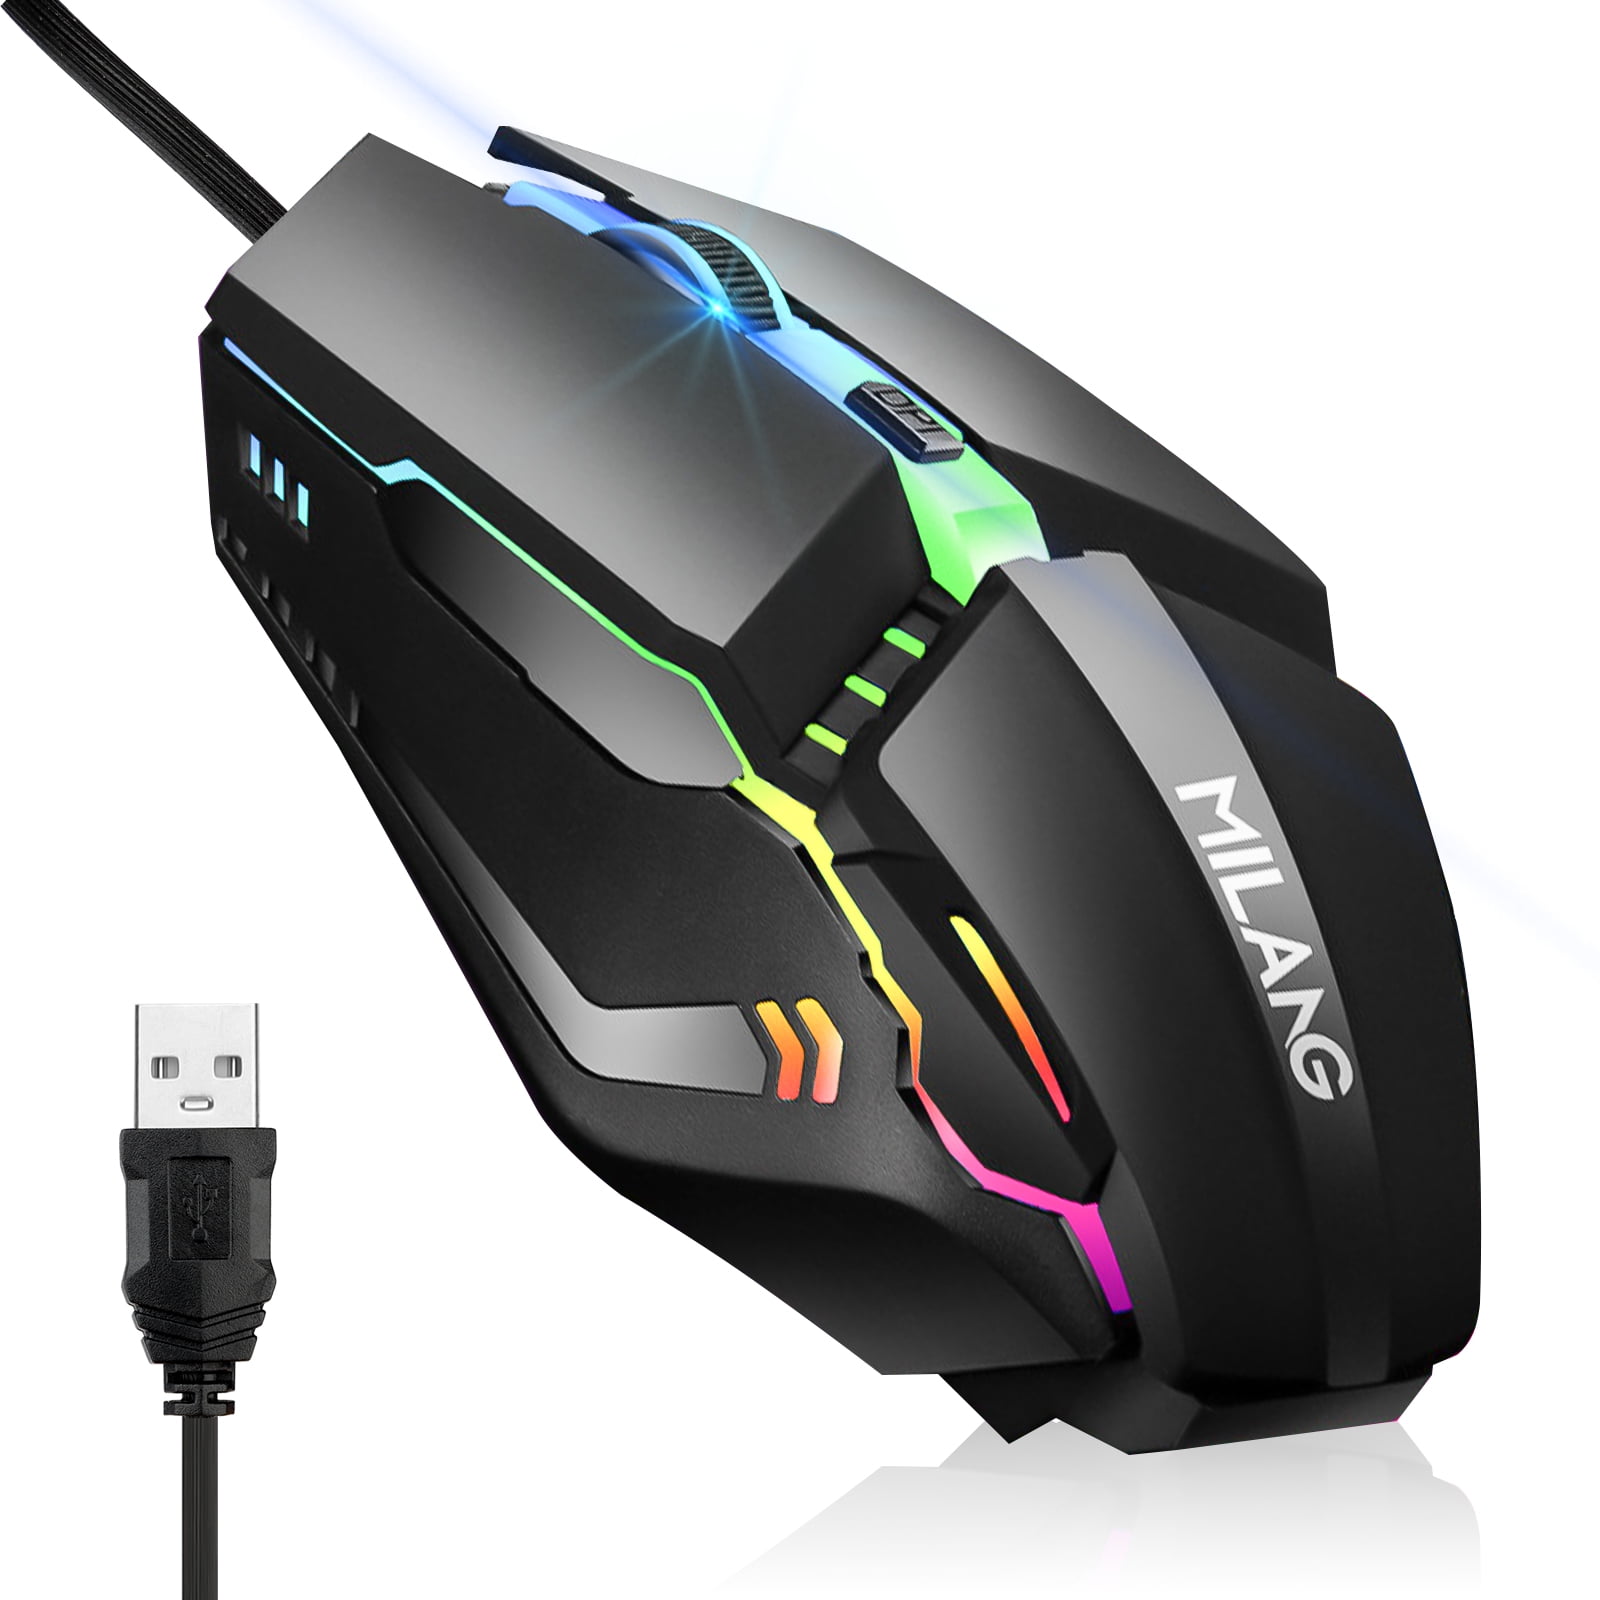 Wired Mouse, USB Wired Computer Mouse Mice, 1600DPI 3 Adjustable Levels  4-Button Ergonomic Mice, Home and Office Mouse for Laptop PC Desktop  Notebook